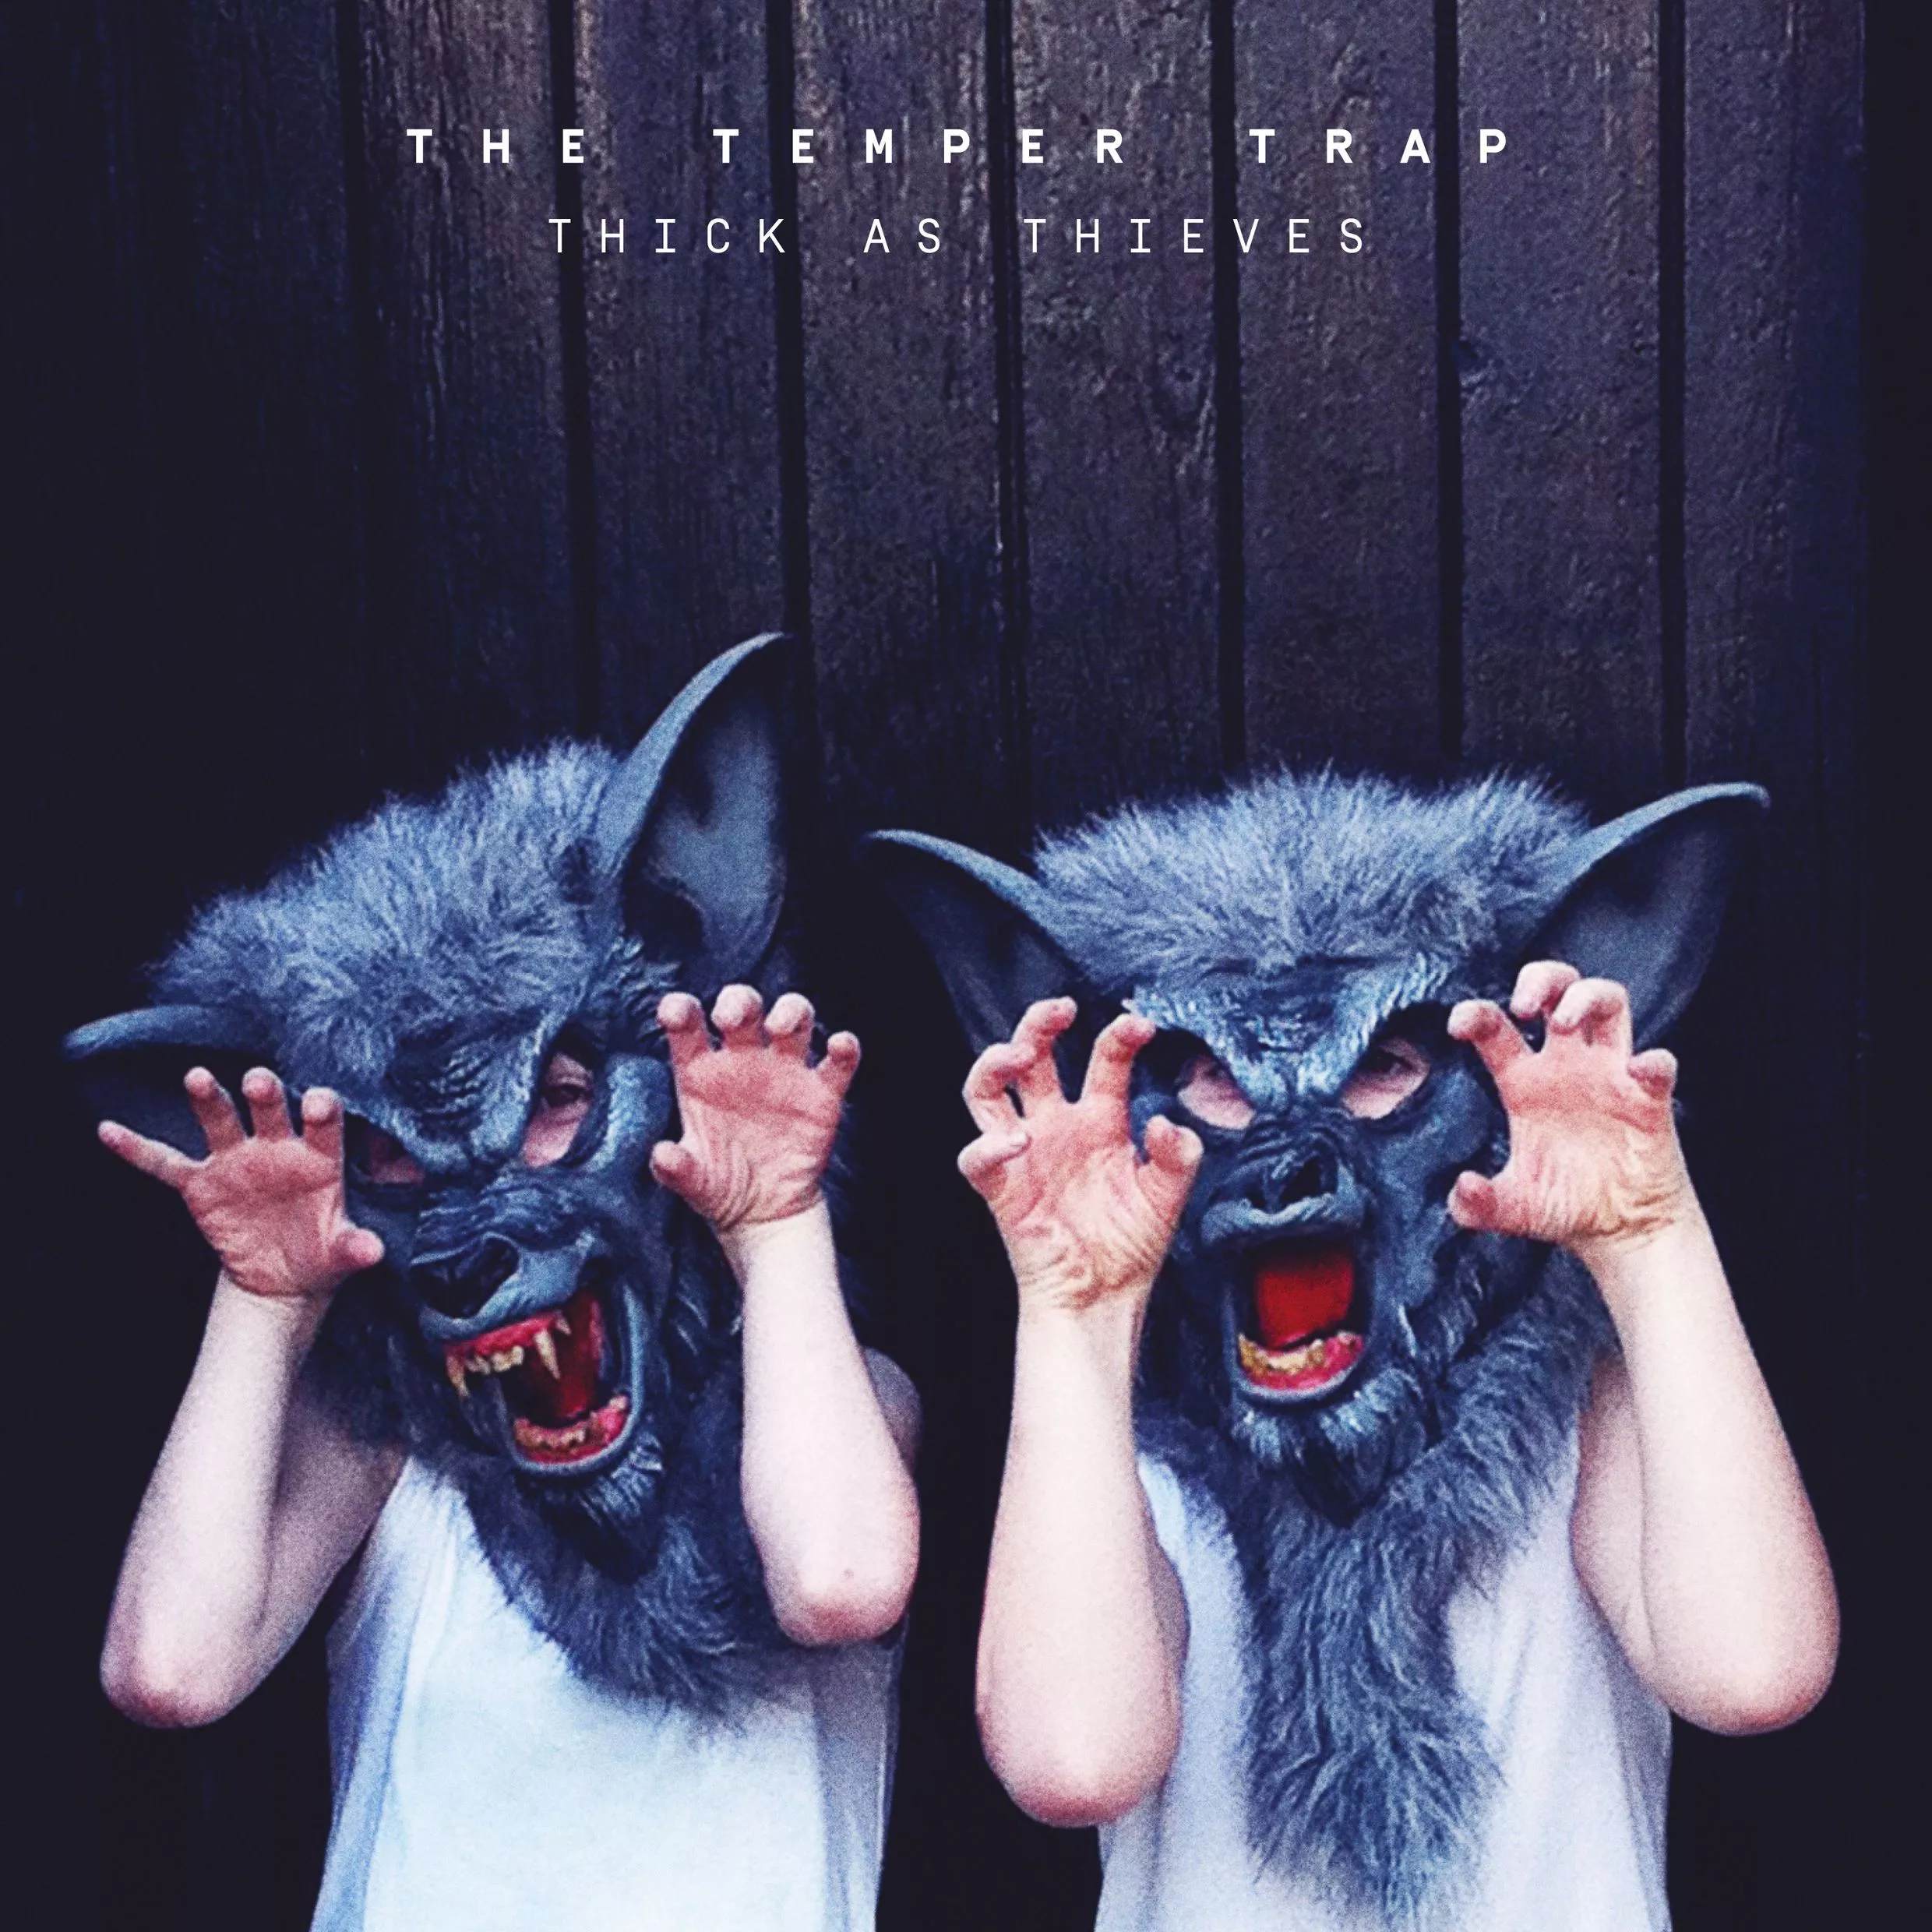 Thick As Thieves - The Temper Trap